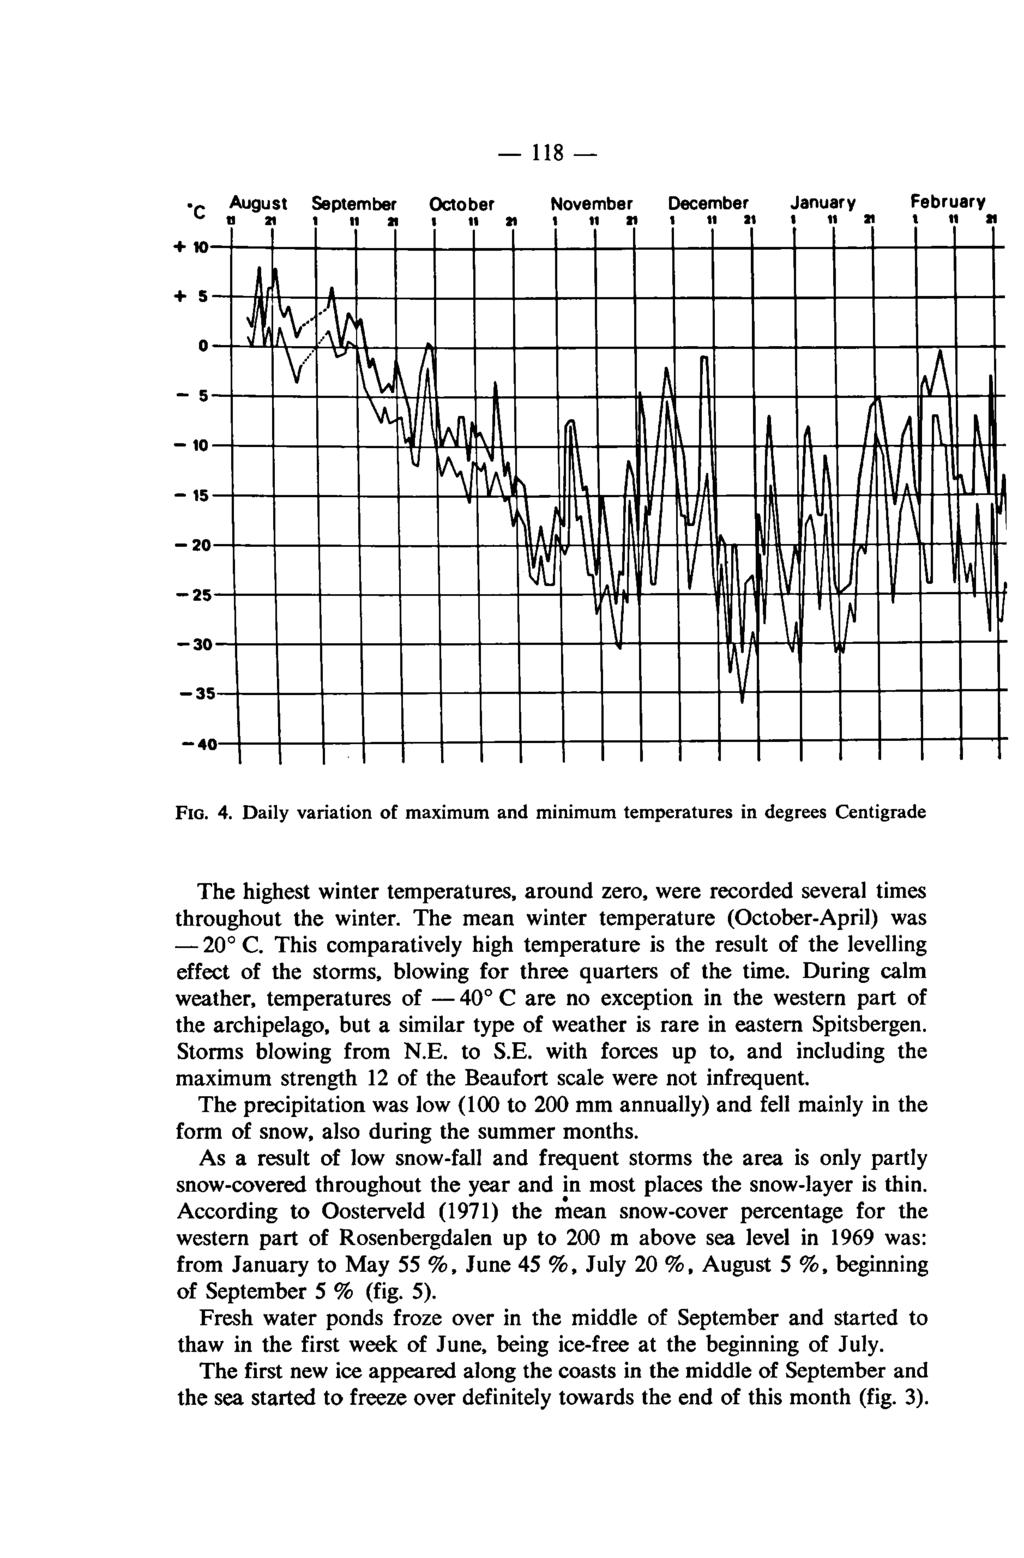 20 40 118 FIG. 4. Daily variation of maximum and minimum in temperatures degrees Centigrade The highest winter temperatures, around zero, were recorded several times throughout the winter.